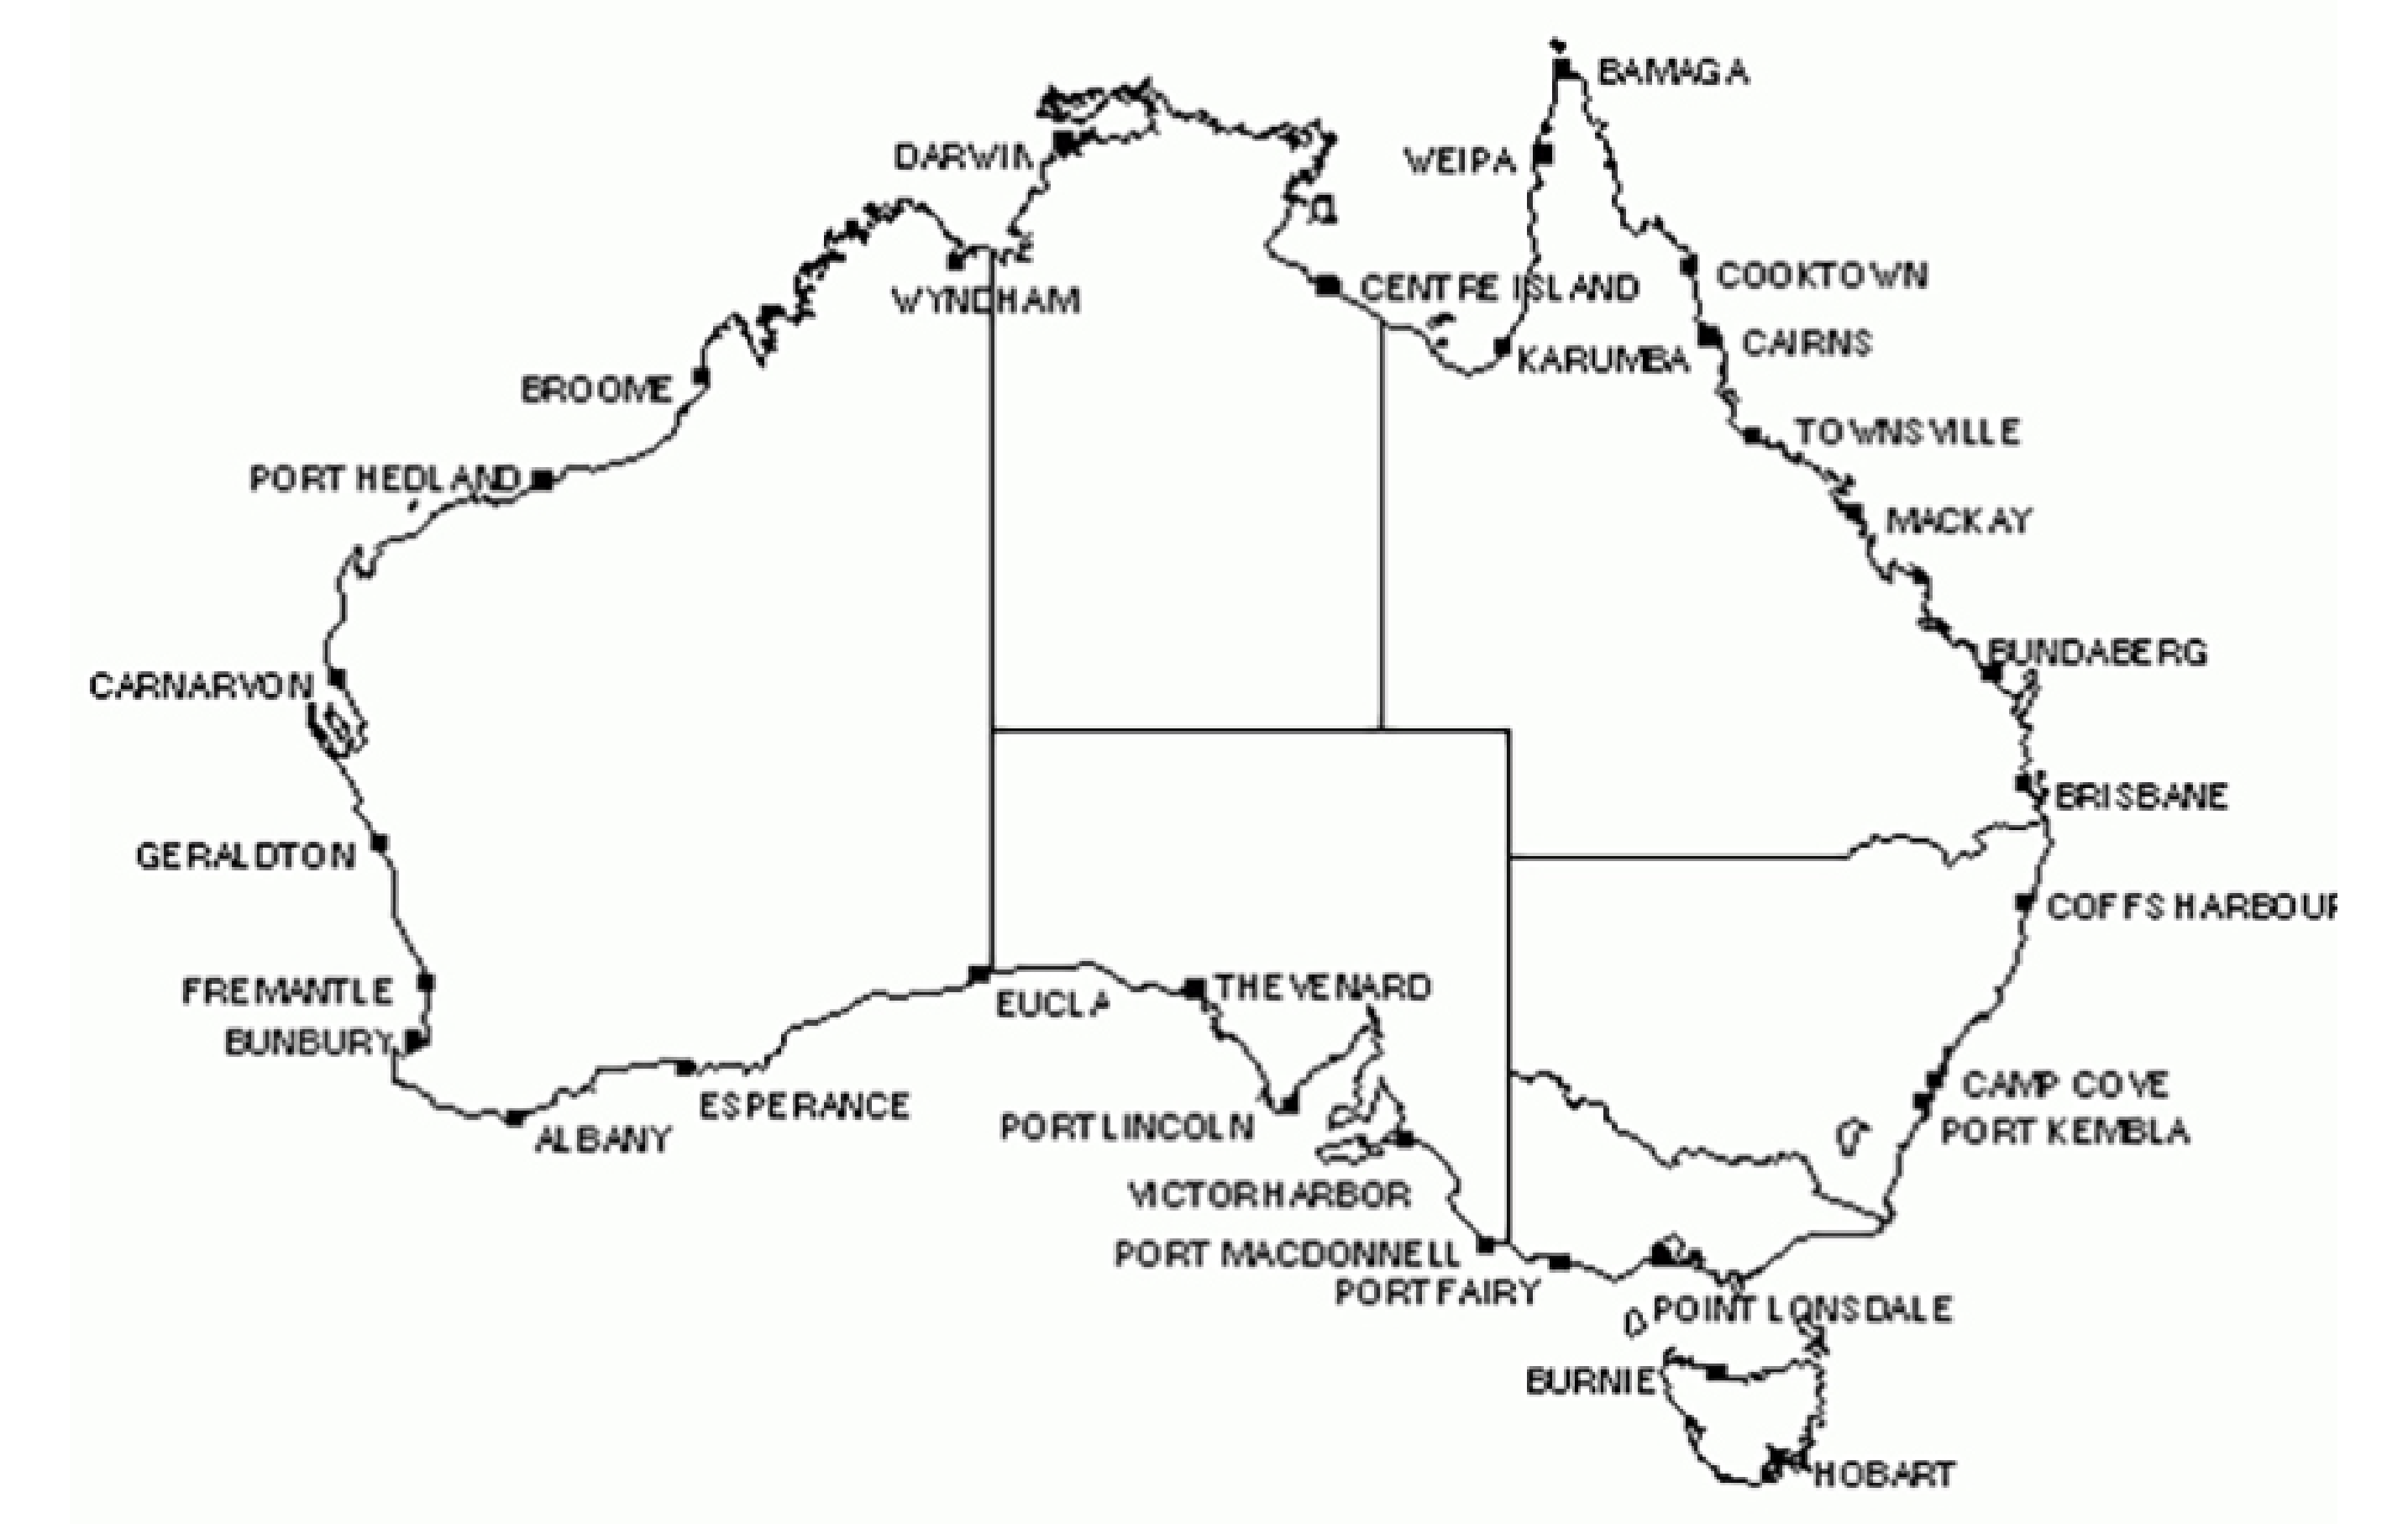 The tide gauge network used to create AHD in 1971 on Australian map